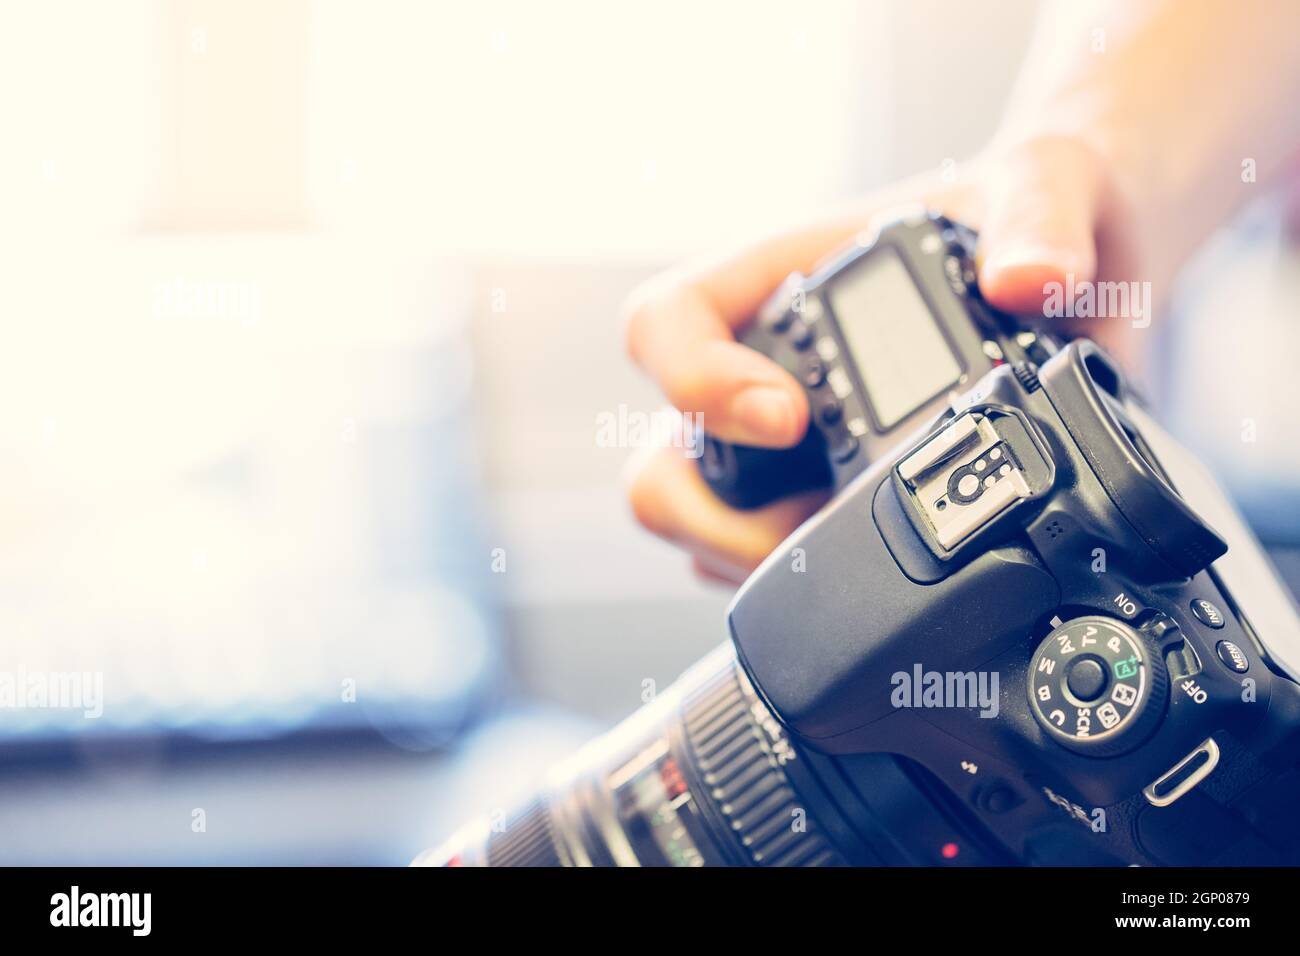 Photographer is holding a professional camera with telephoto lens in his hand, laptop in the blurry background Stock Photo